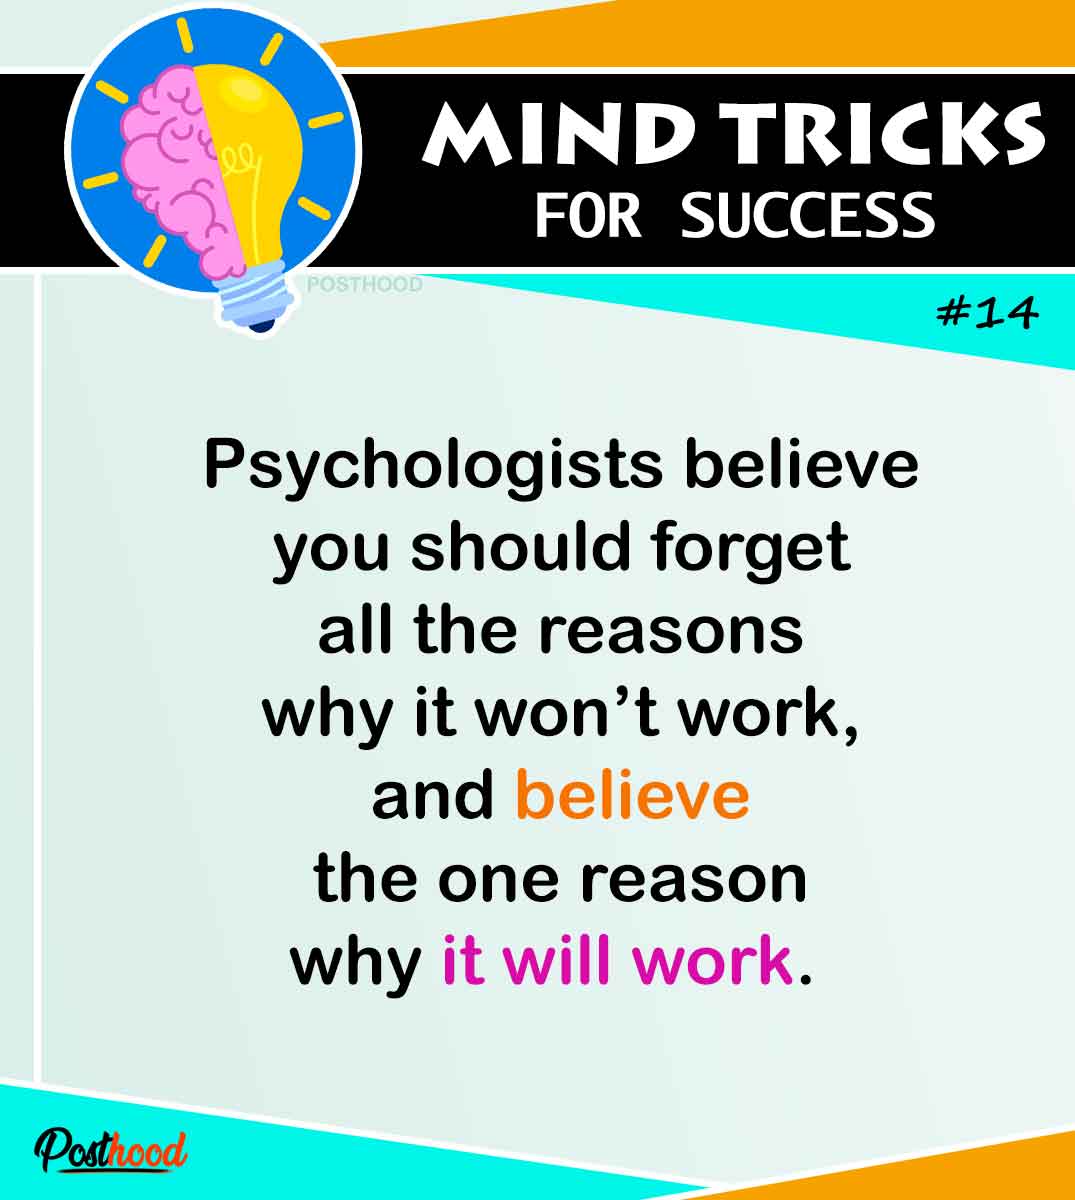 Get the right mindset with these amazing mind tricks that you can use to achieve success and greatness in life.